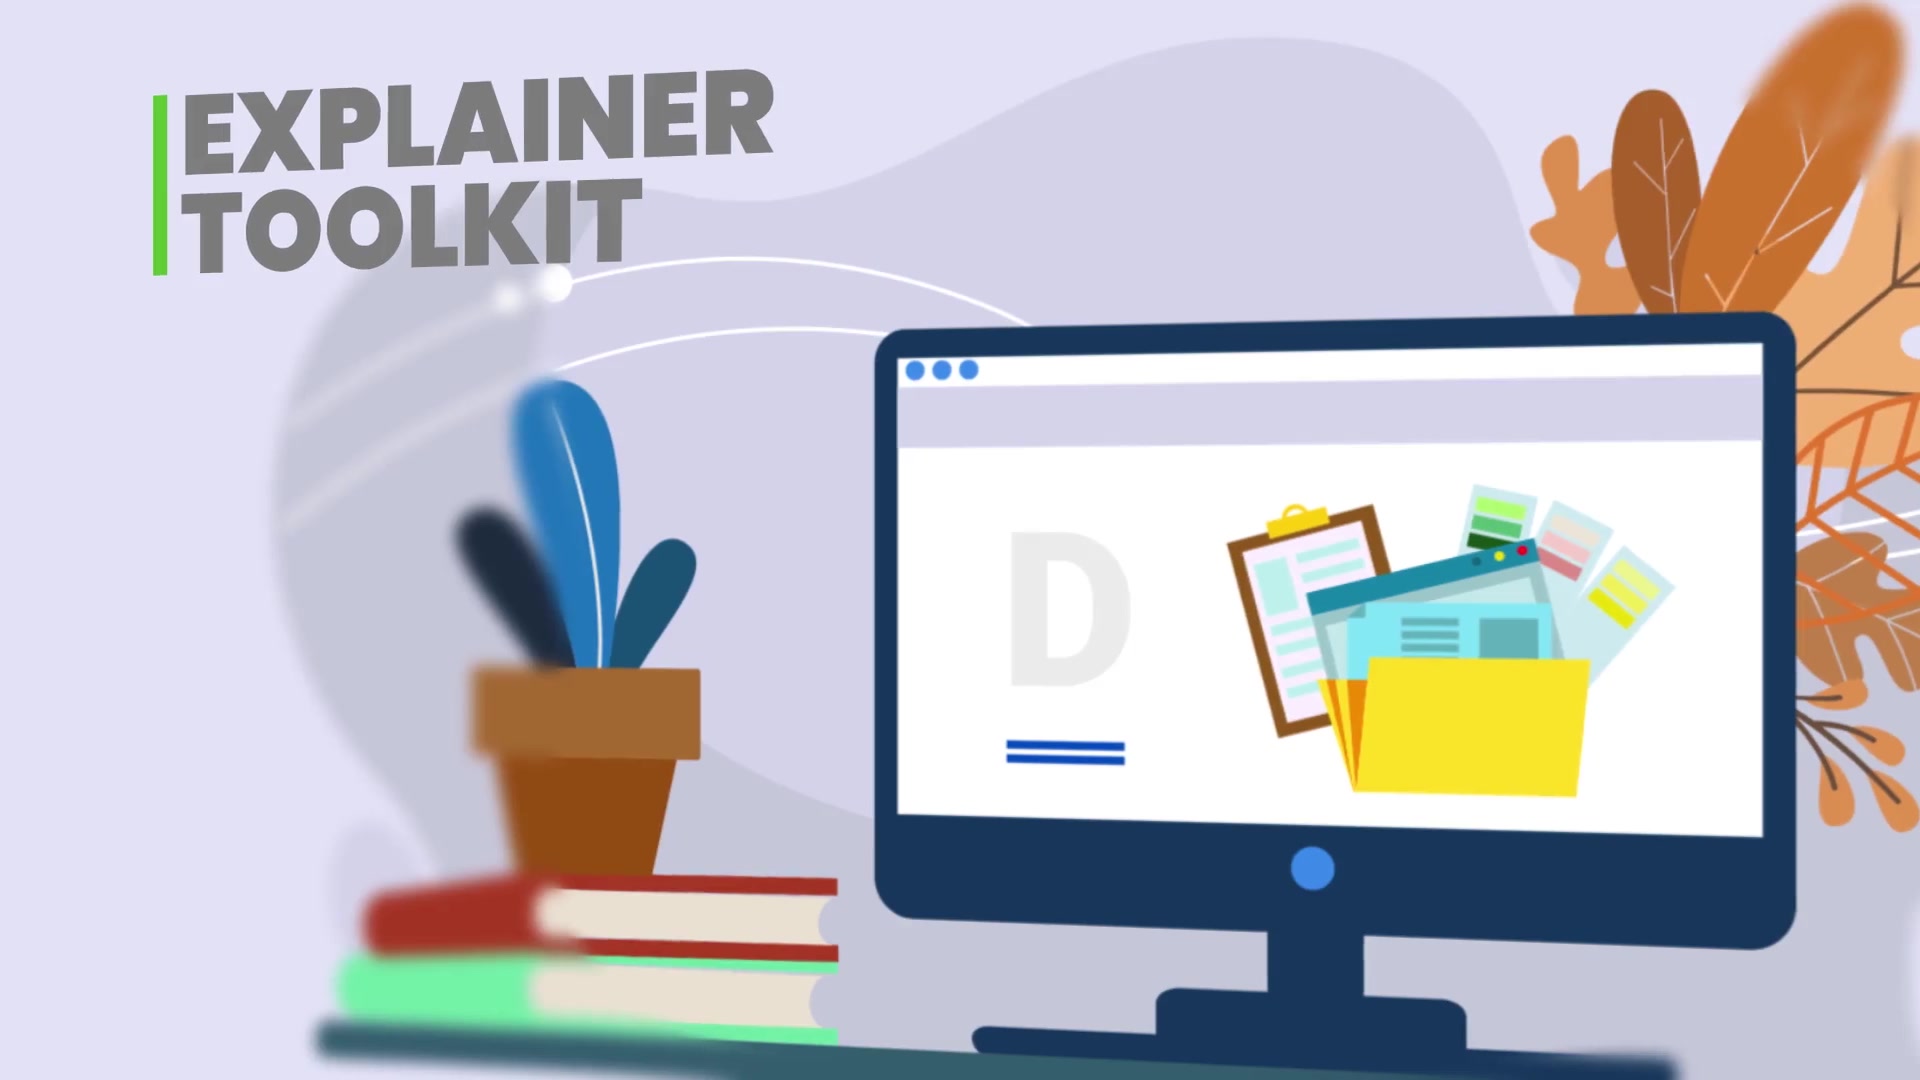 explainer video toolkit 4 nulled